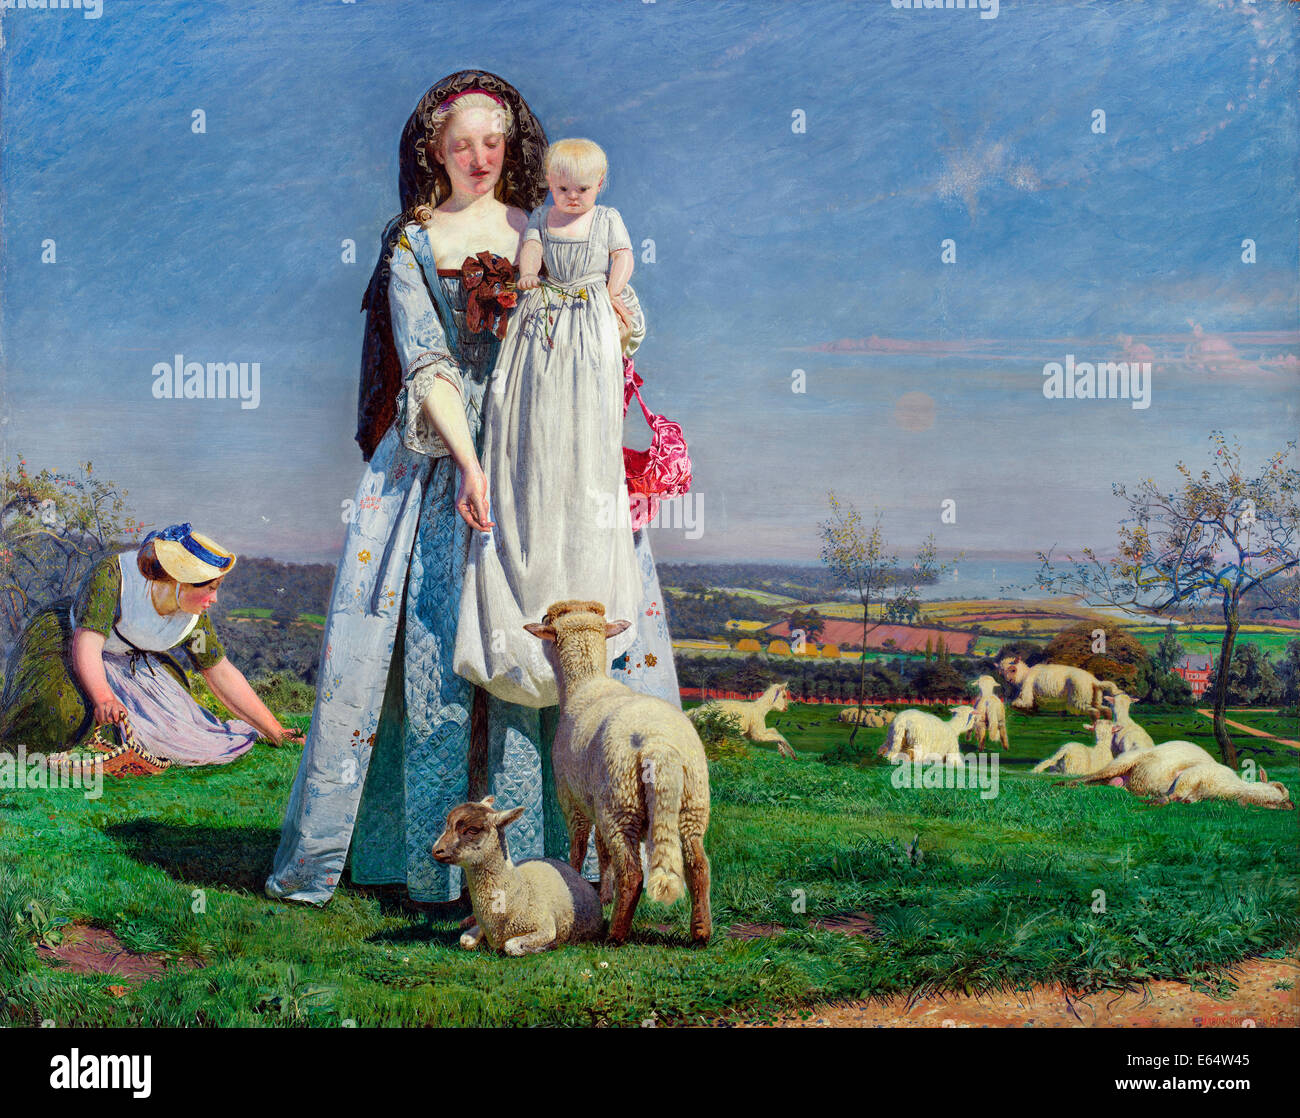 Ford Madox Brown, Pretty Baa-Lambs 1851-1859 Oil on panel. Birmingham Museum and Art Gallery, Birmingham England. Stock Photo